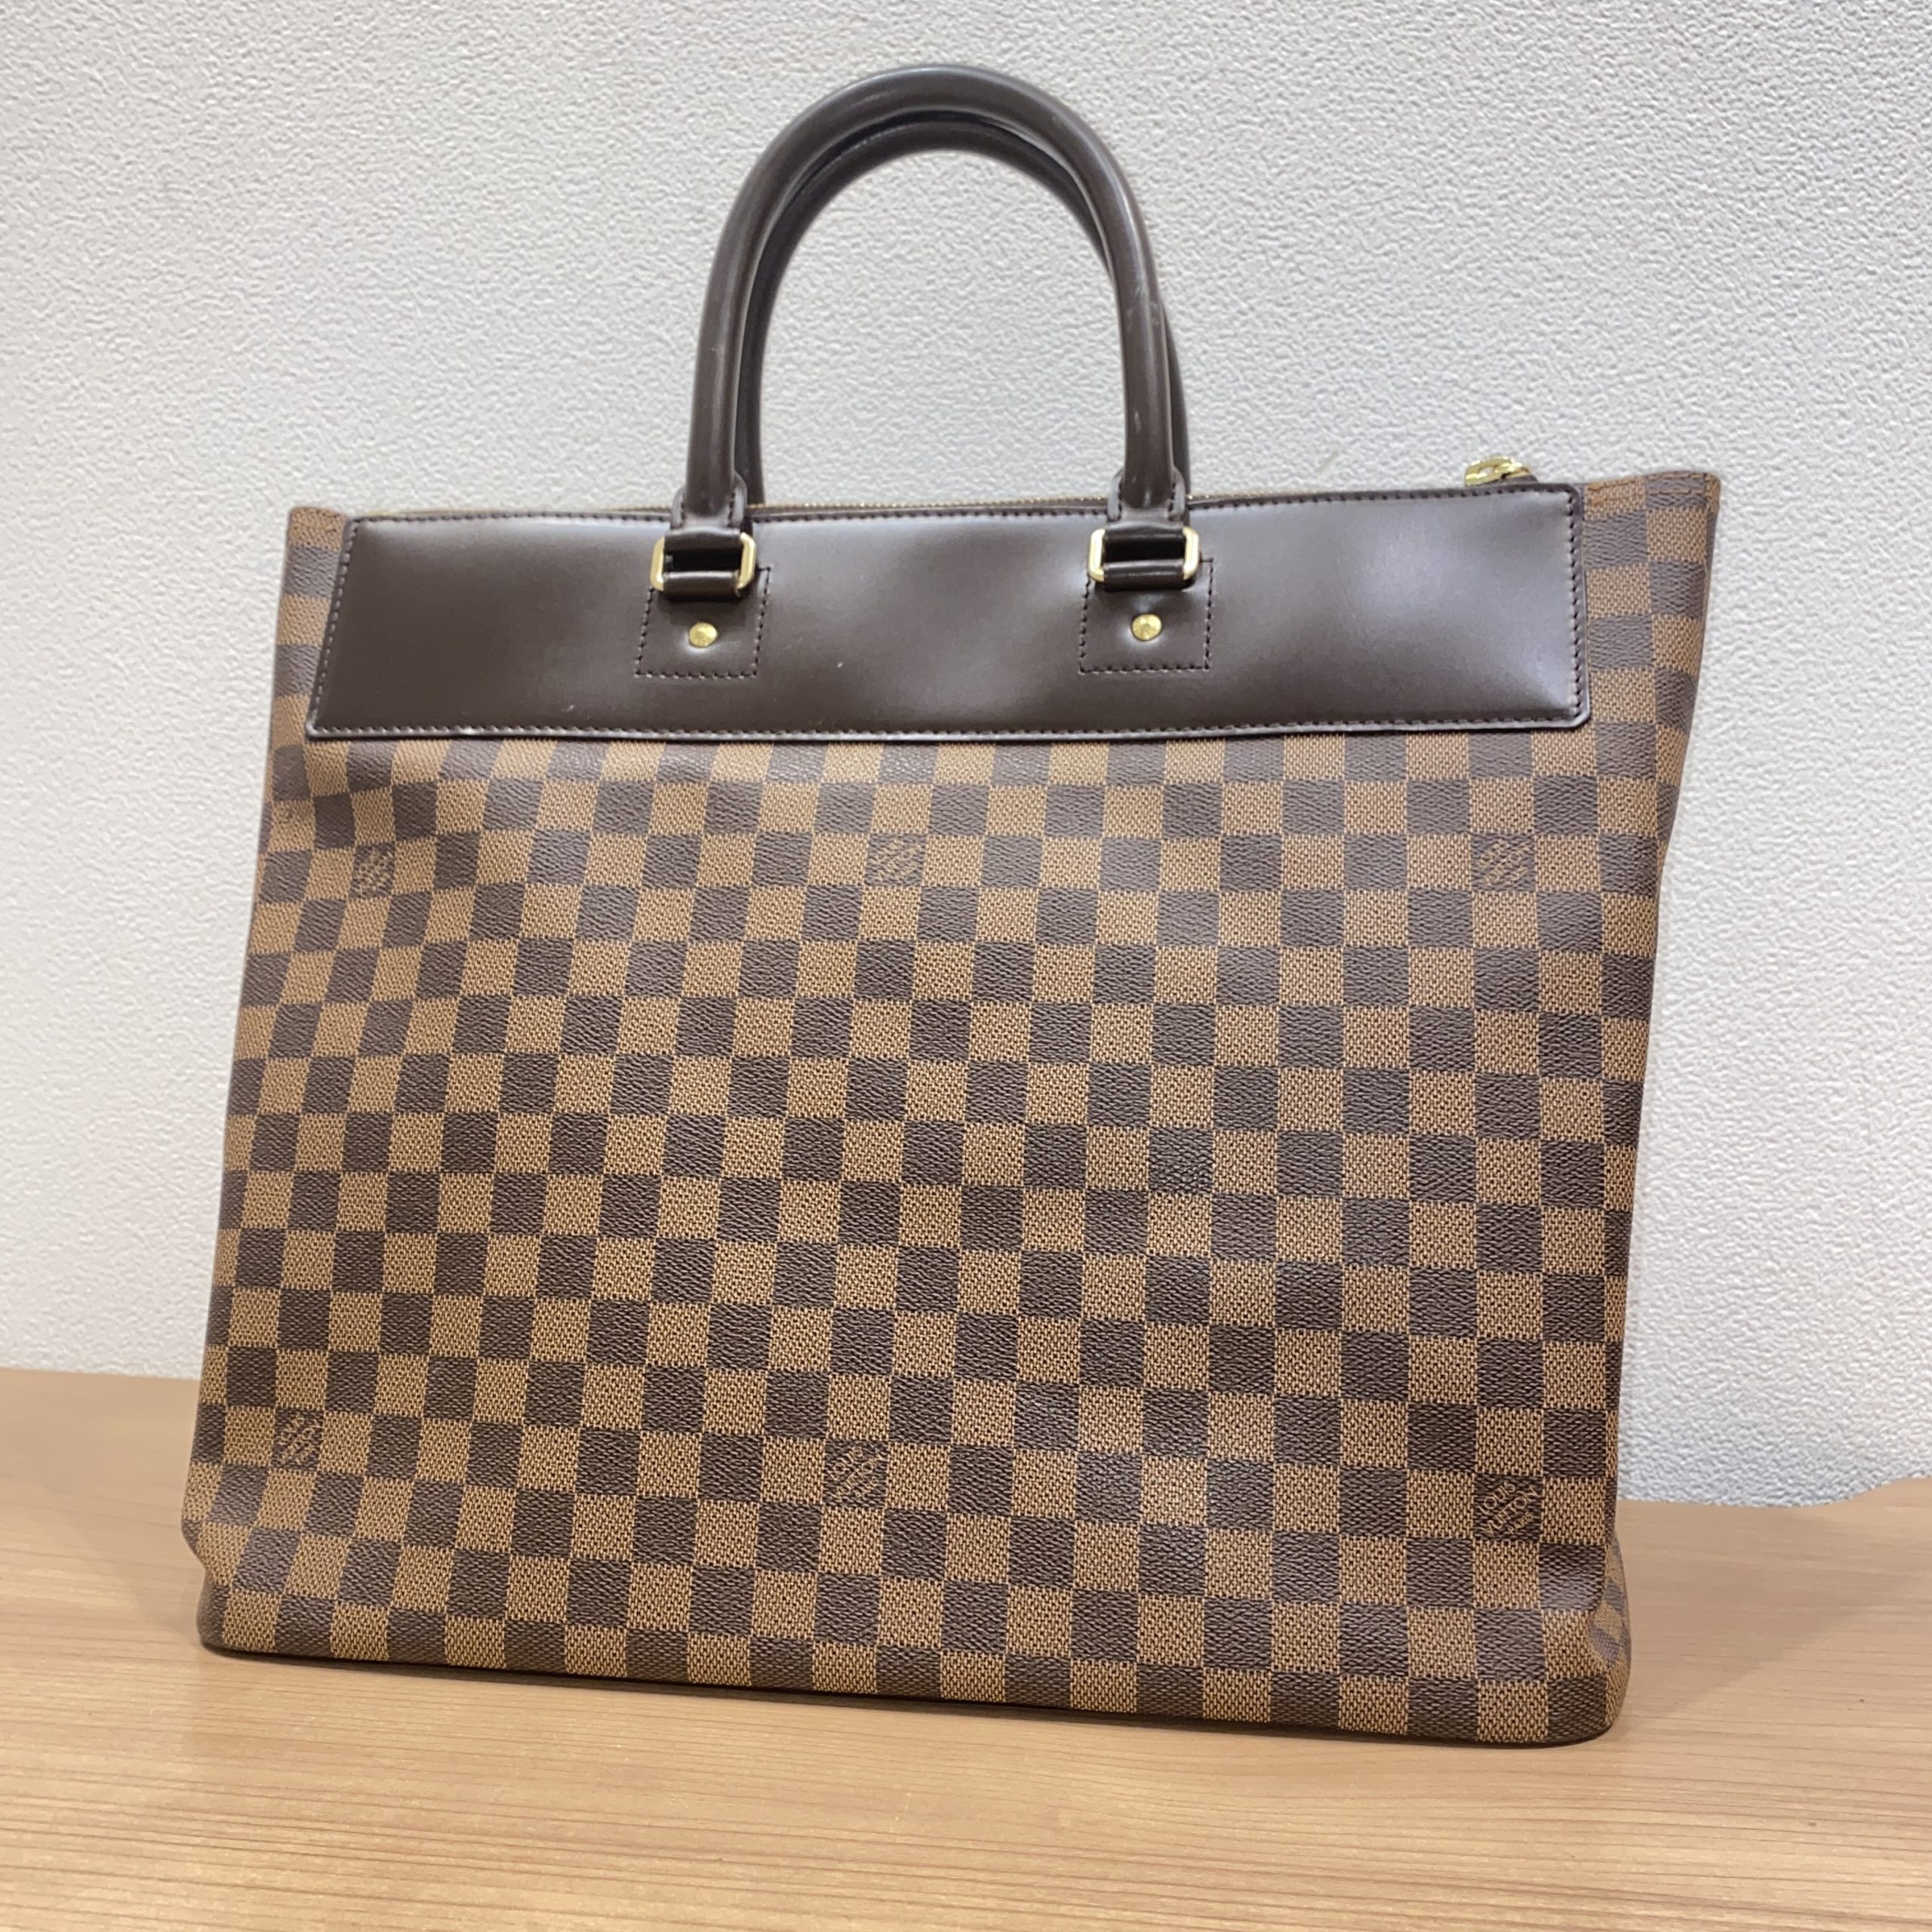 【LOUIS VUITTON/ルイヴィトン】ダミエ グリニッジMM N41165